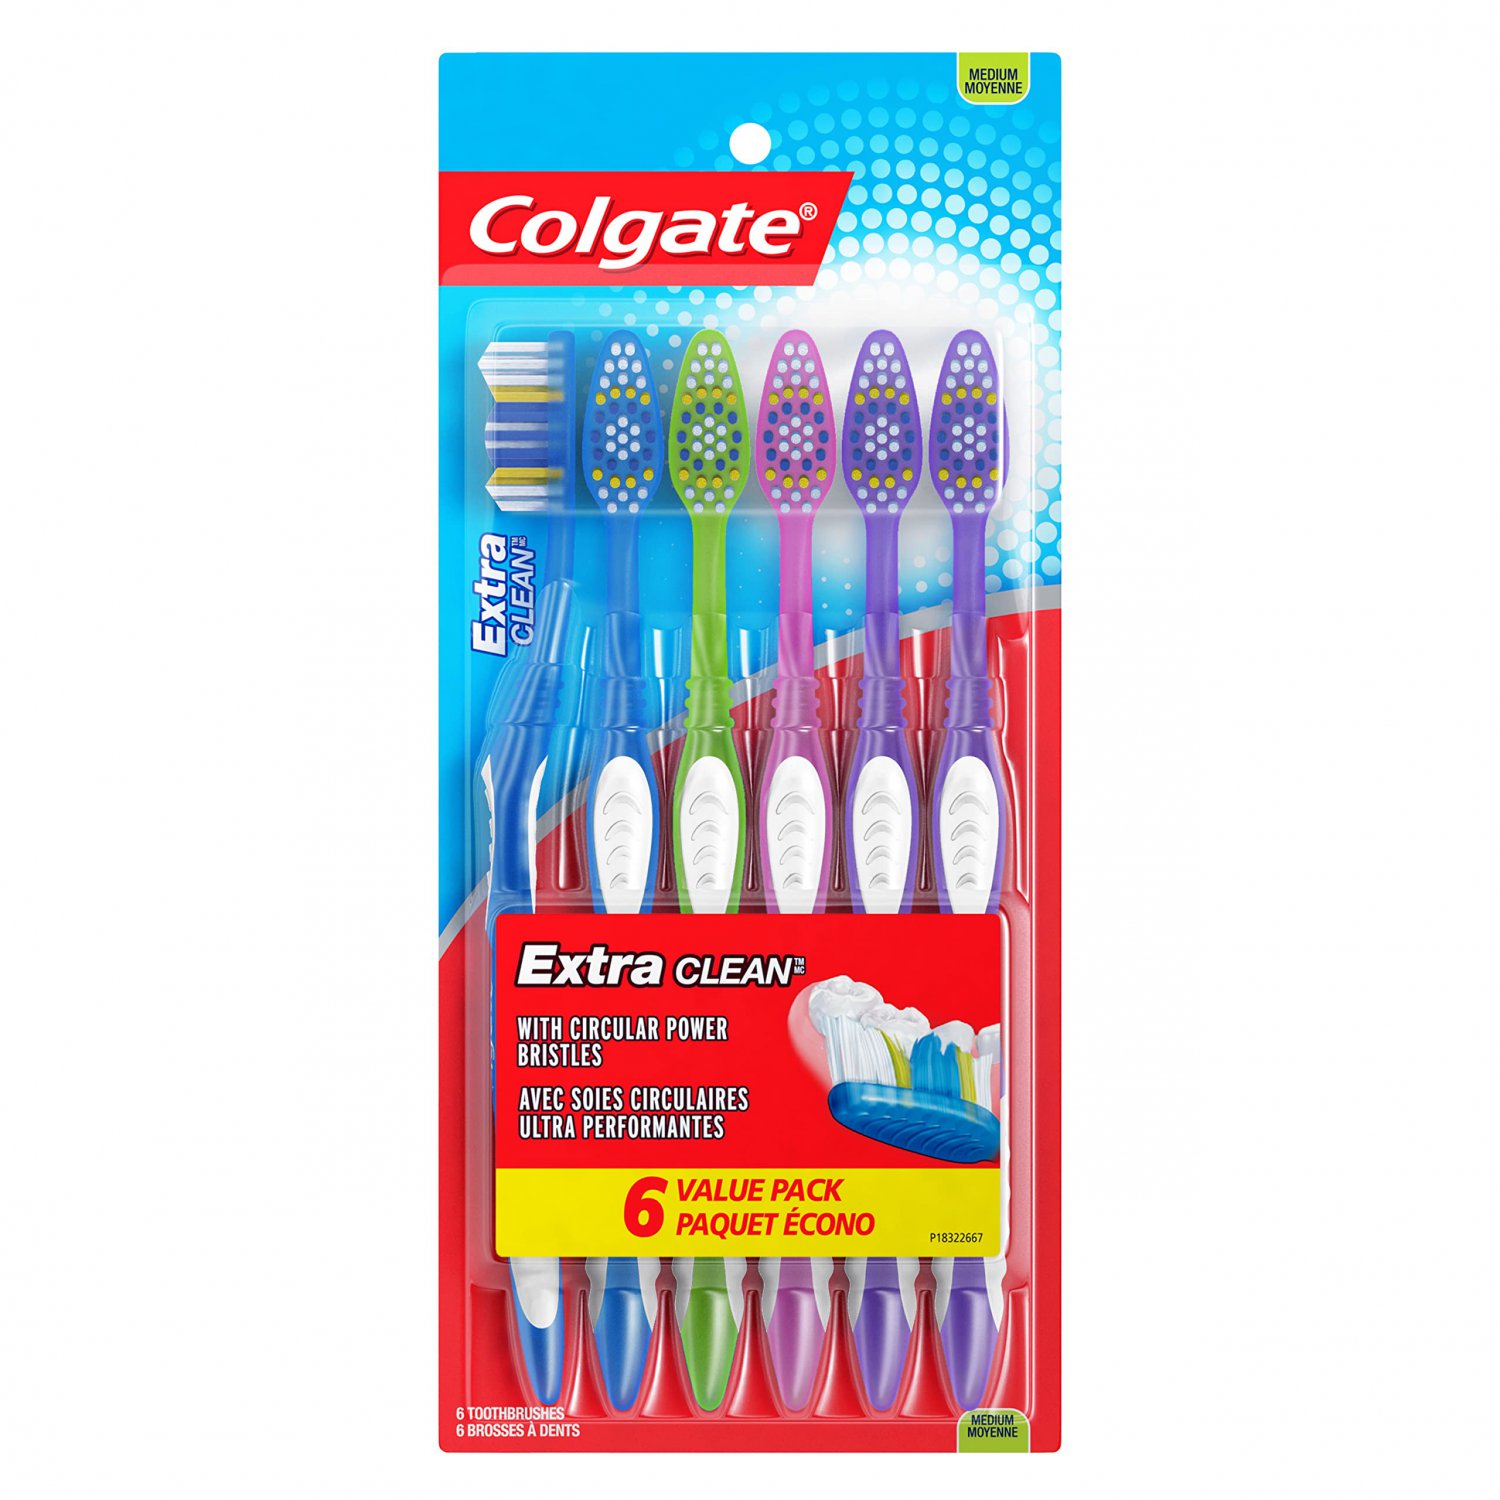 Colgate Extra Clean Toothbrush, Medium Toothbrush for Adults, 6 Count